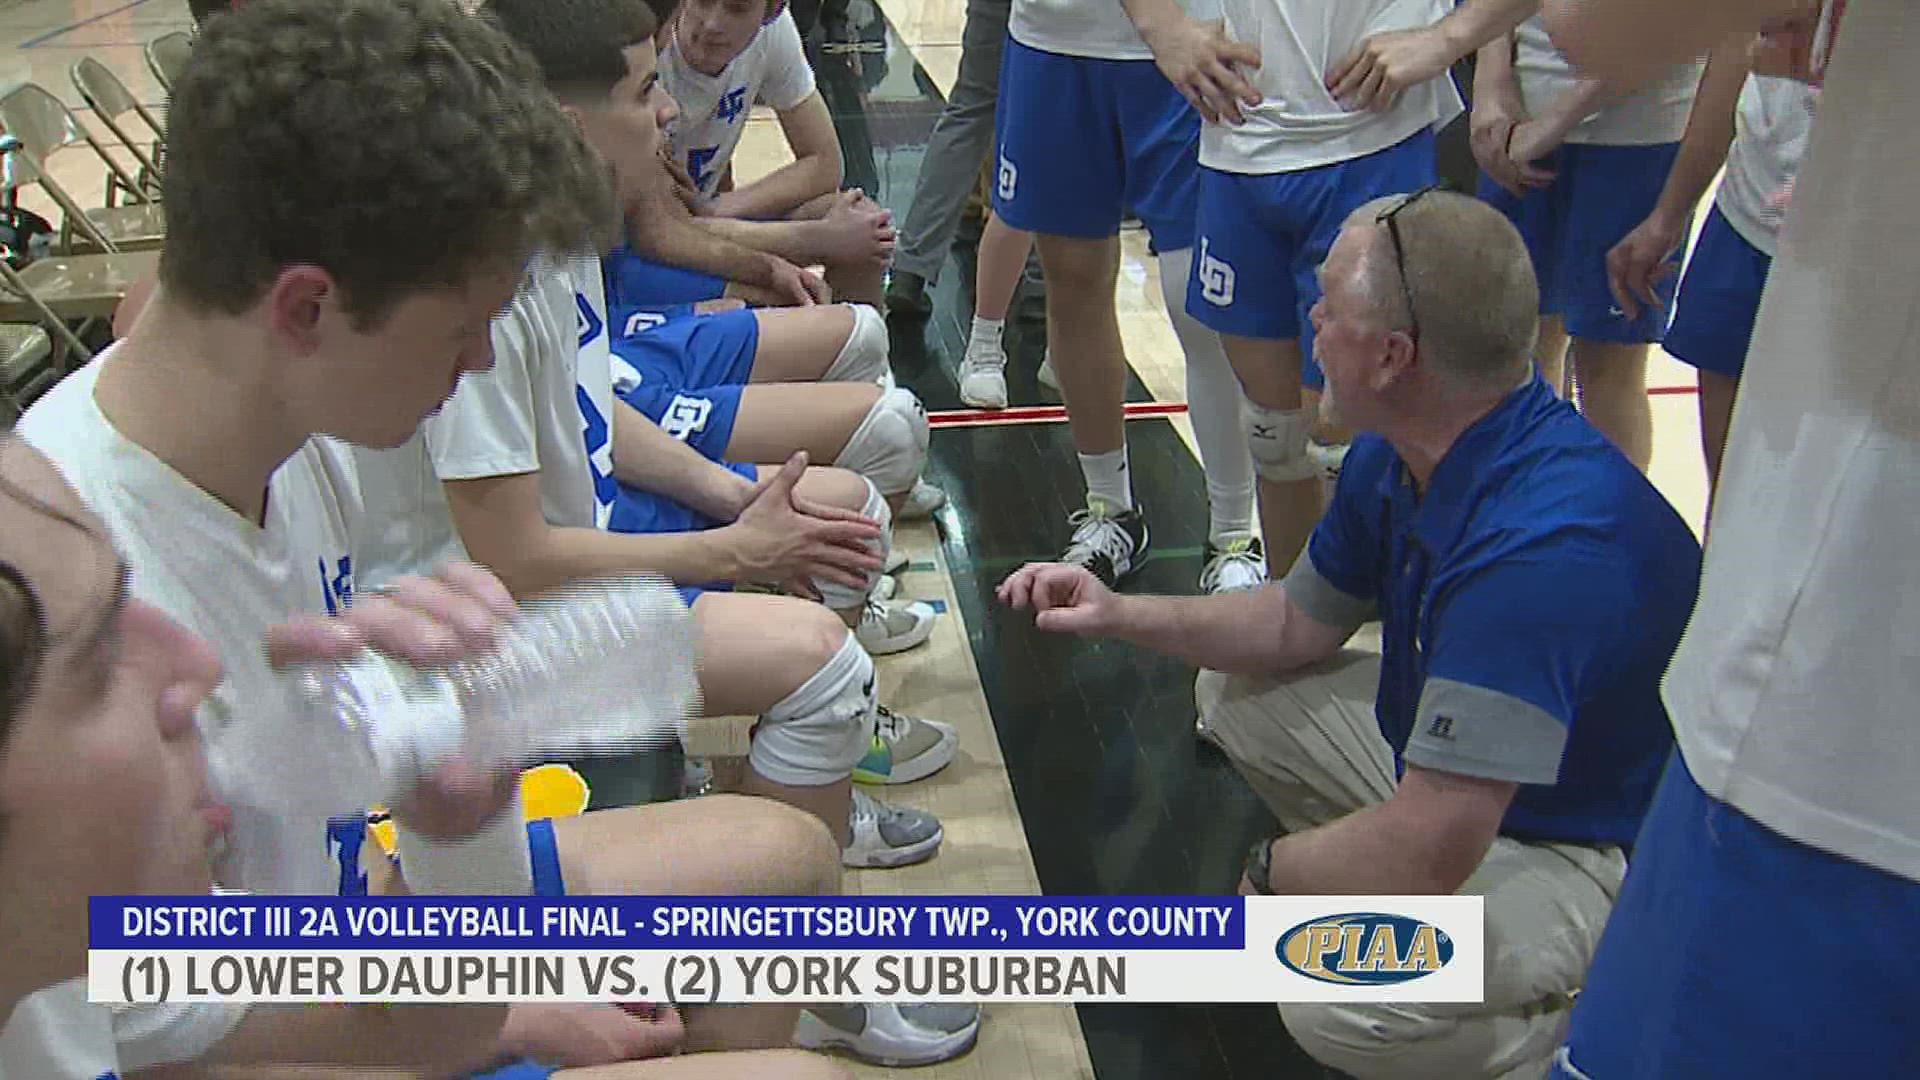 Lower Dauphin looks to defend their state title after claiming their second straight District III gold over York Suburban